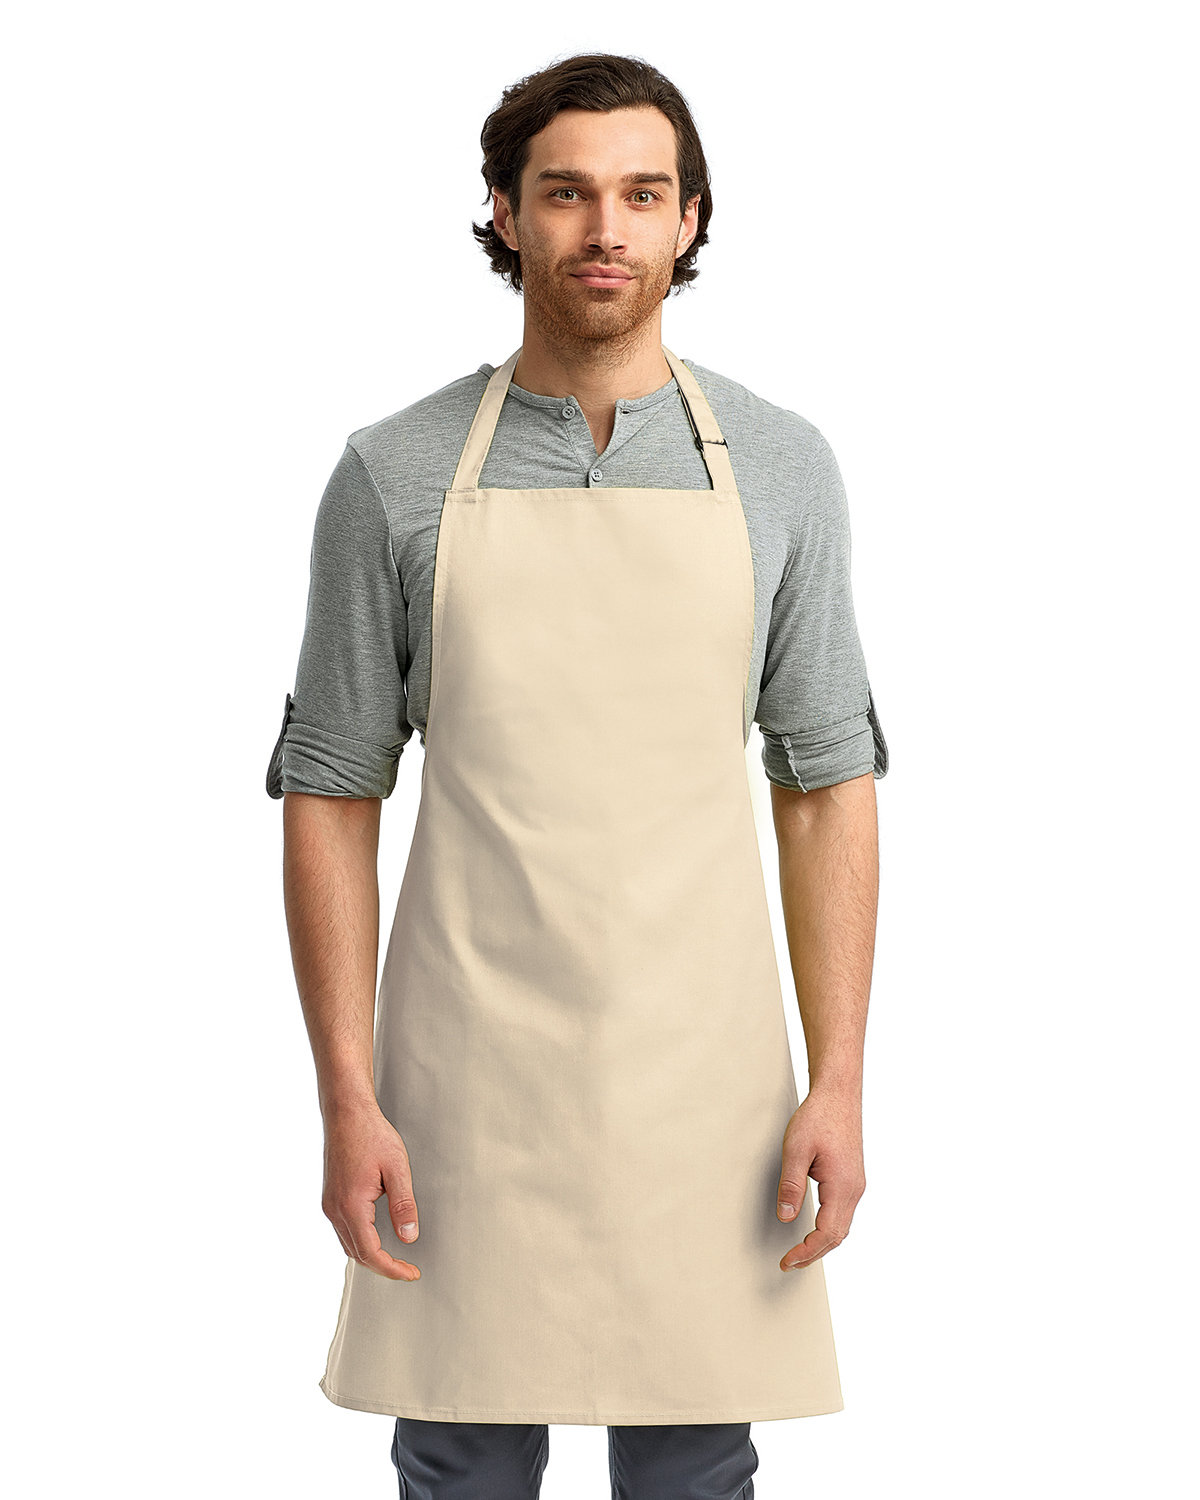 Artisan Collection by Reprime "Colours" Sustainable Bib Apron NATURAL 